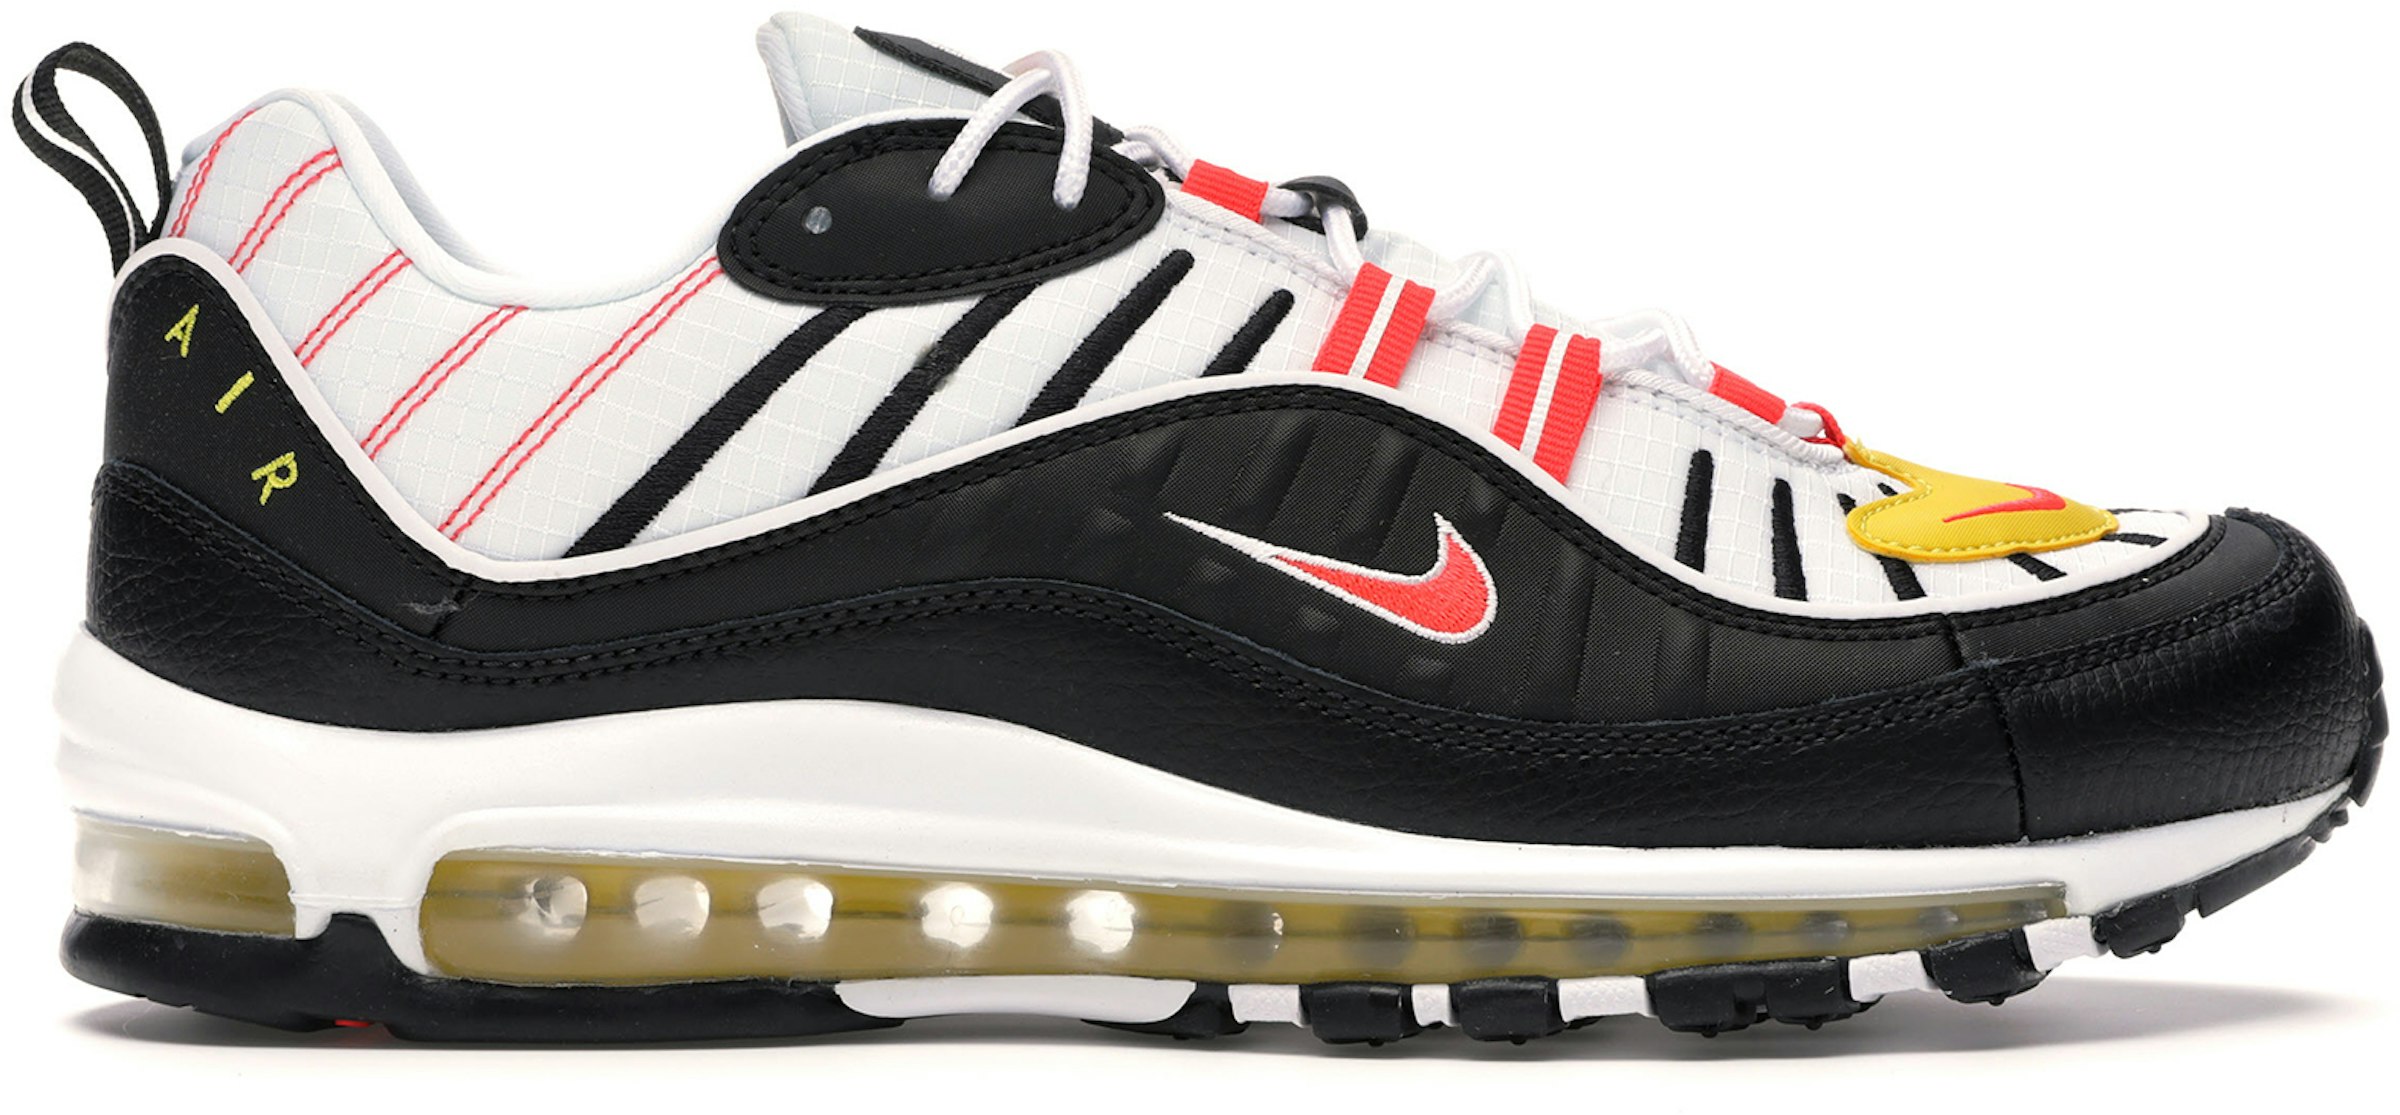 Buy Nike Air Max 98 Shoes & New Sneakers StockX